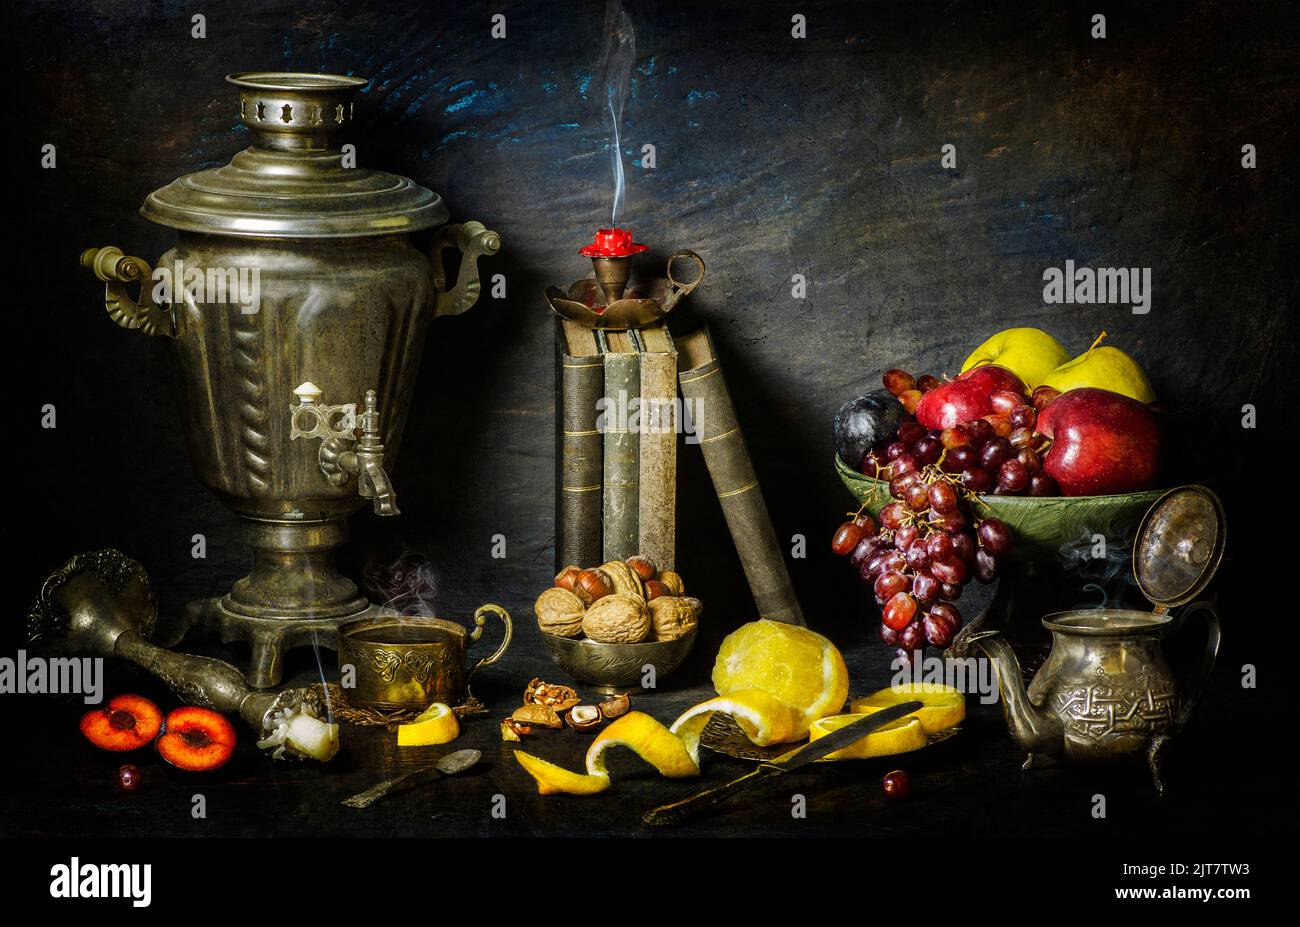 Classic still life with vintage books placed with old silver samovar, candlesticks, fresh fruits, cup of tea, tea pot and nuts on vintage background. Stock Photo